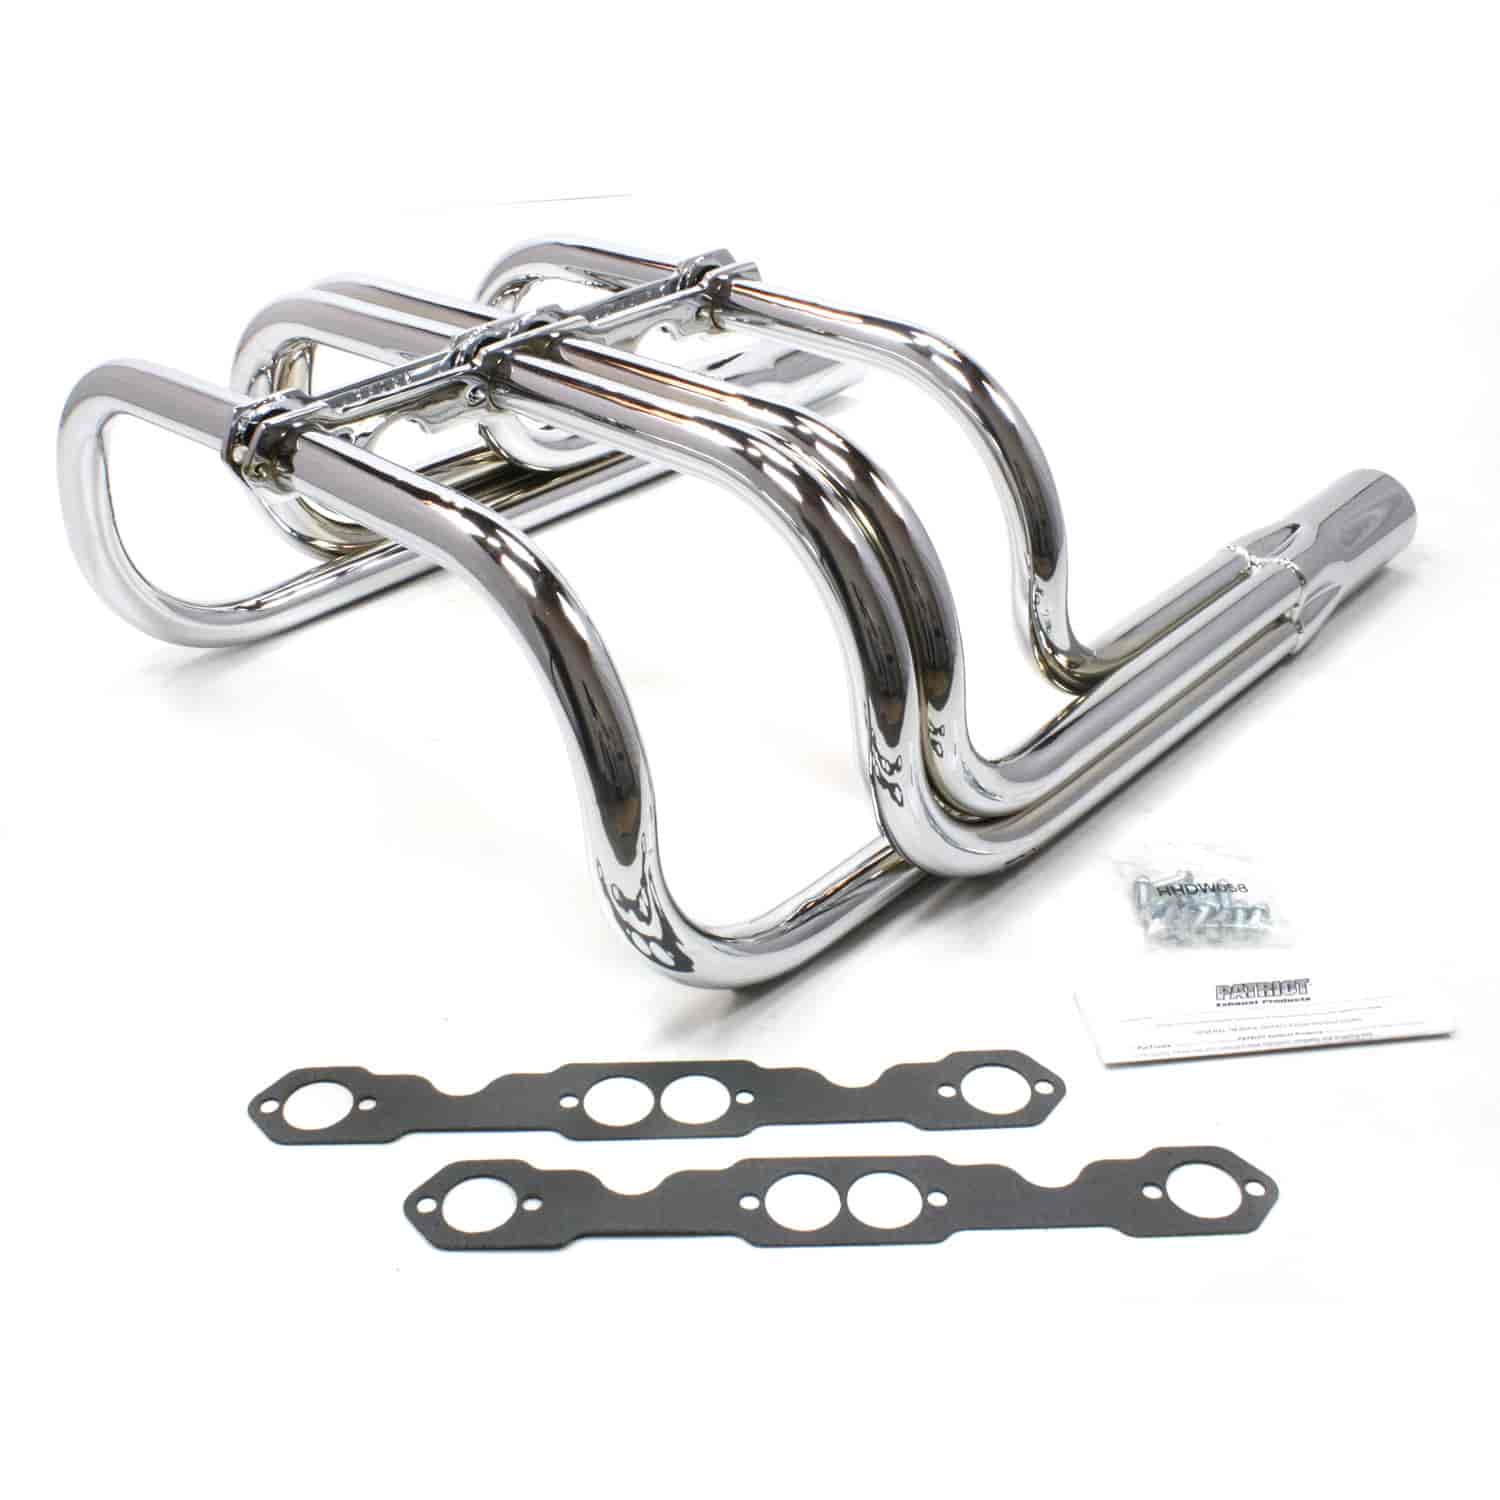 EXHAUST MANIFOLD HEADERS KIT FOR CHEVY SMALL BLOCK 265-400 T-BUCKET ROADSTER 